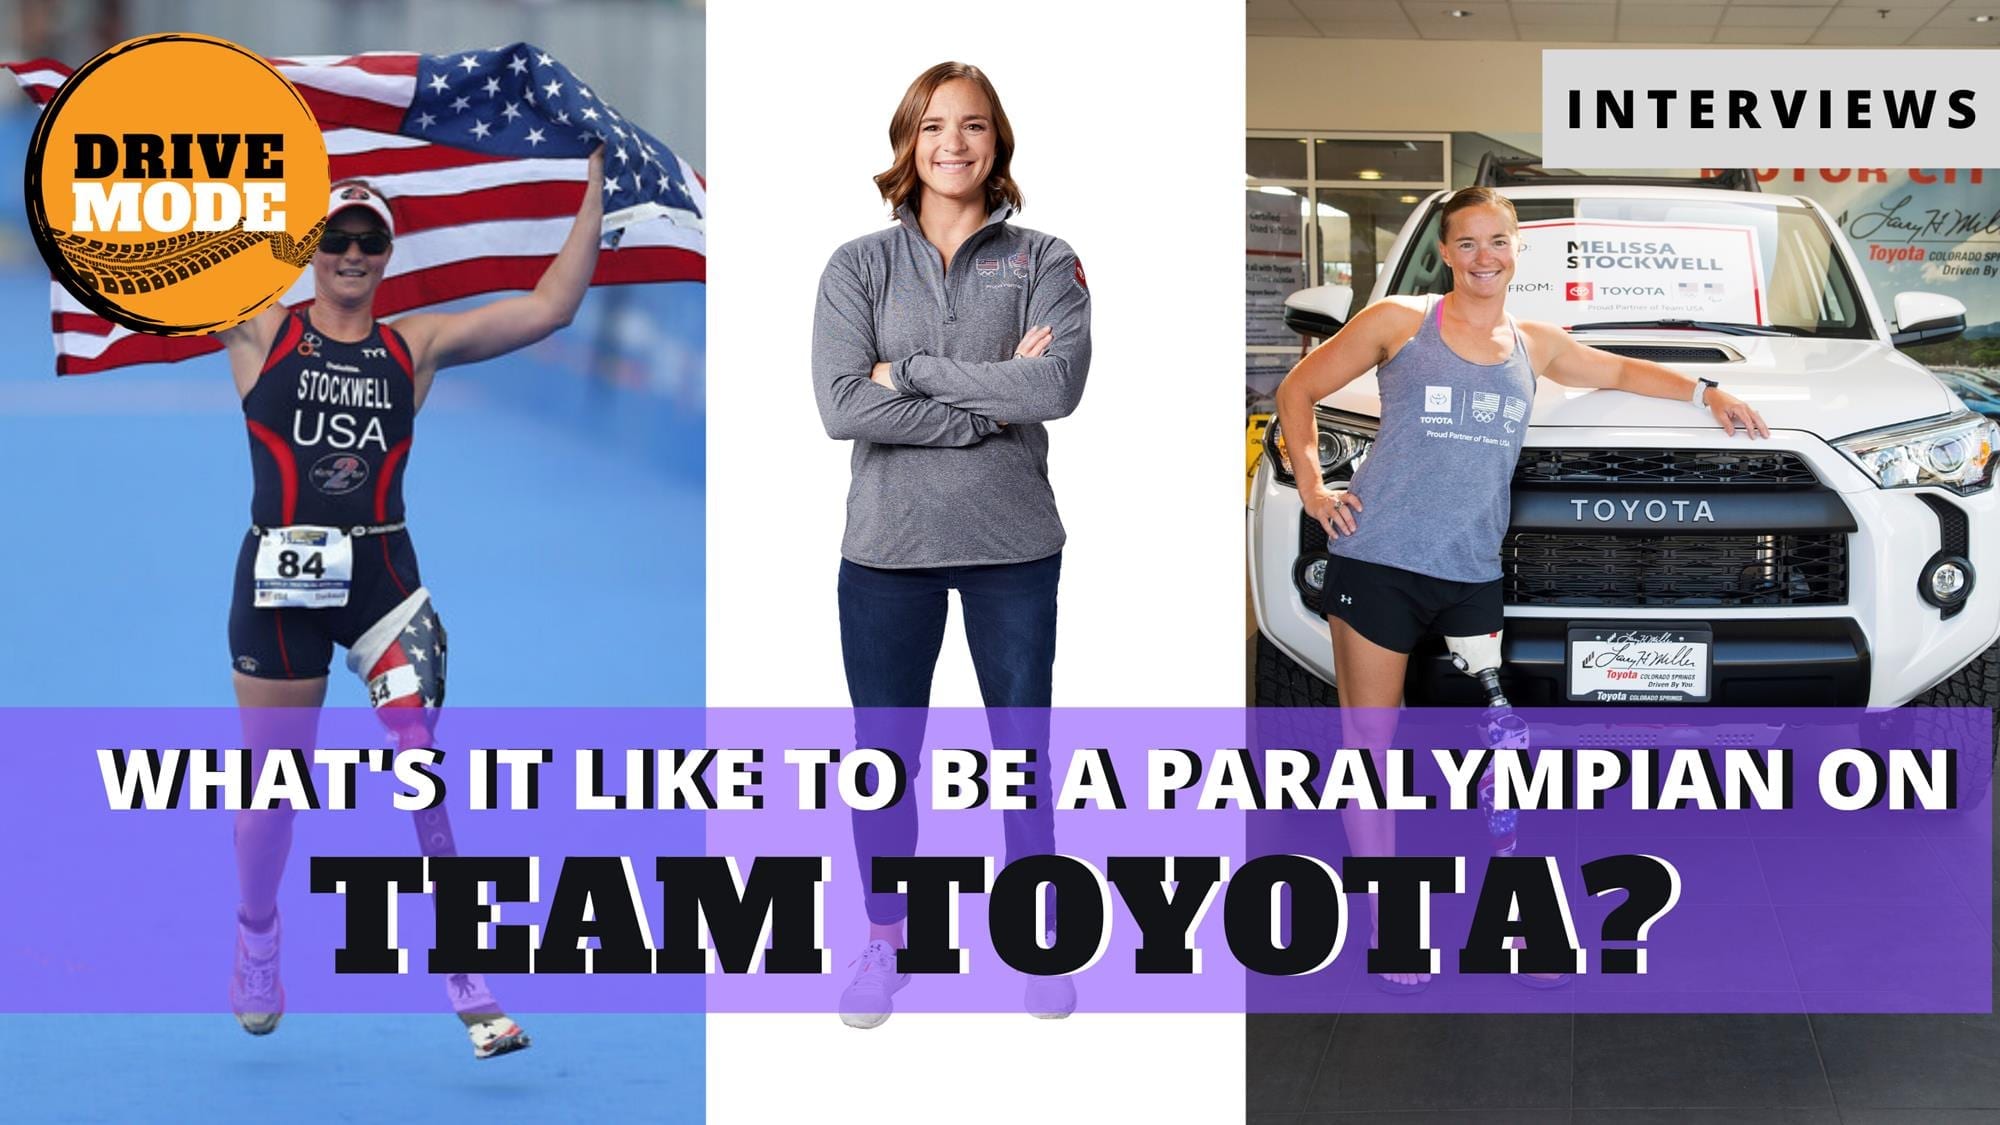 An Interview with Paralympic Medalist Melissa Stockwell